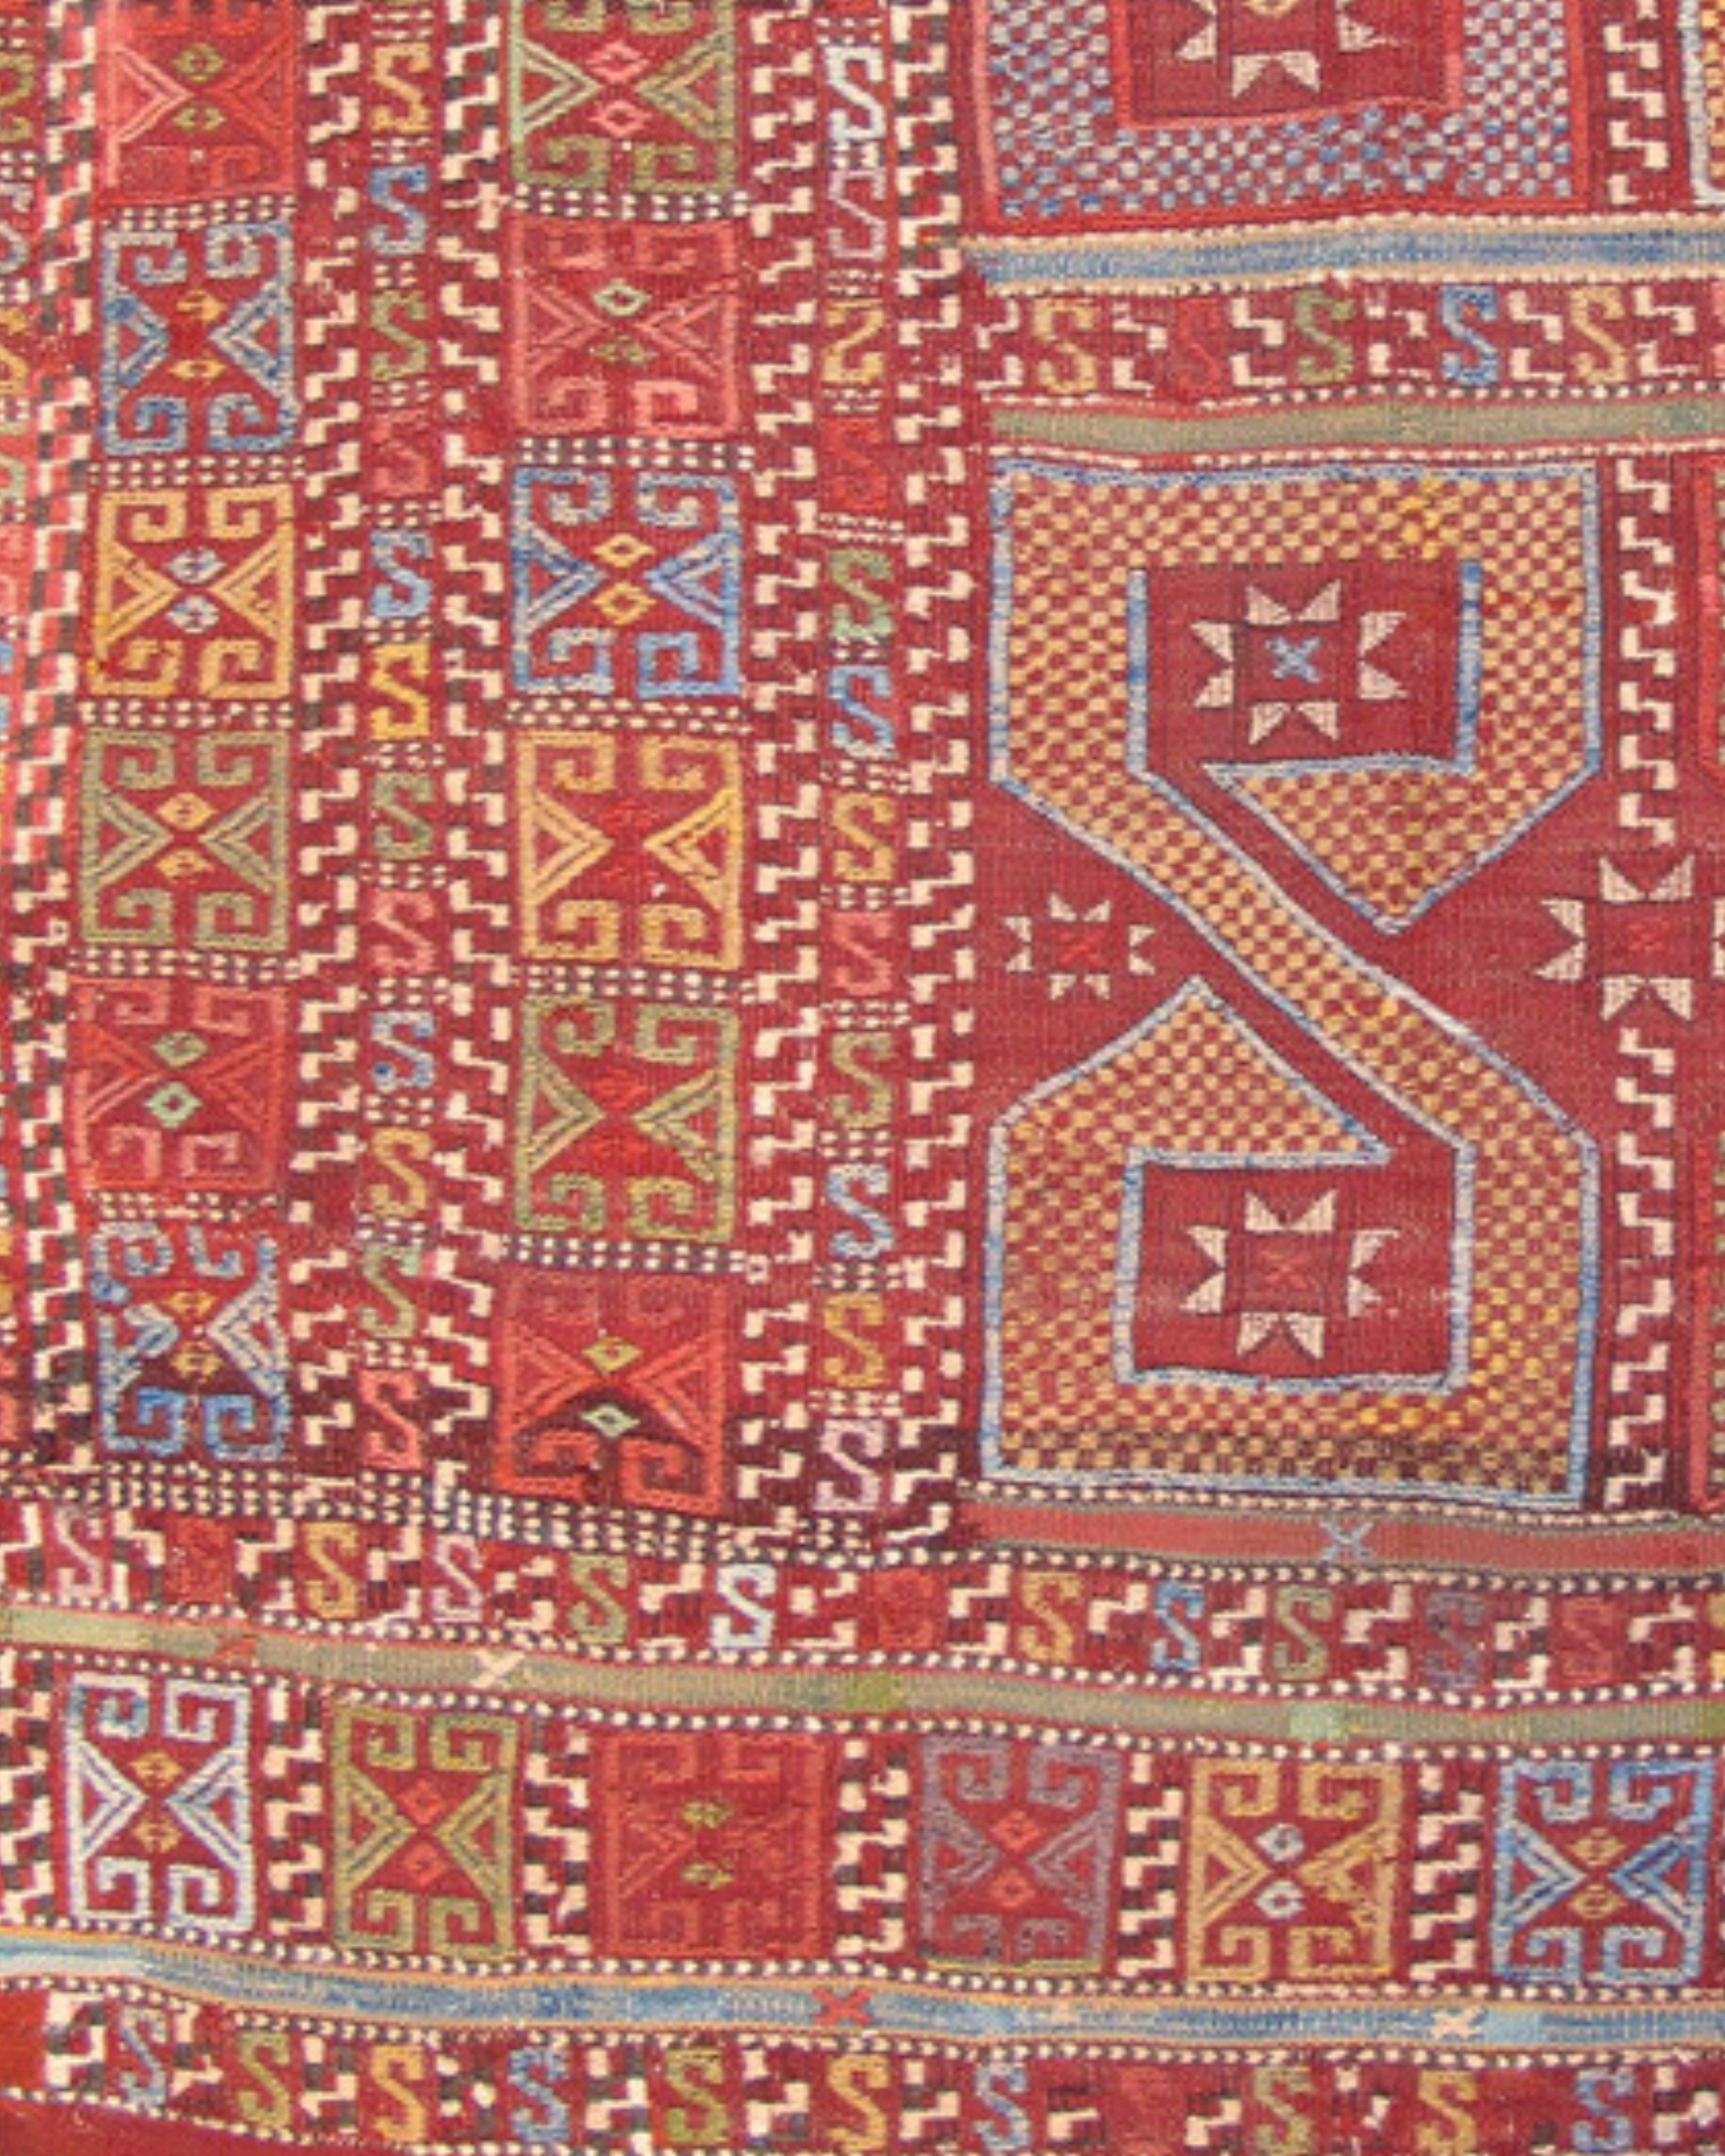 Antique Red Turkish Jajim Flat-Weave Rug, Mid-19th Century  In Excellent Condition For Sale In San Francisco, CA